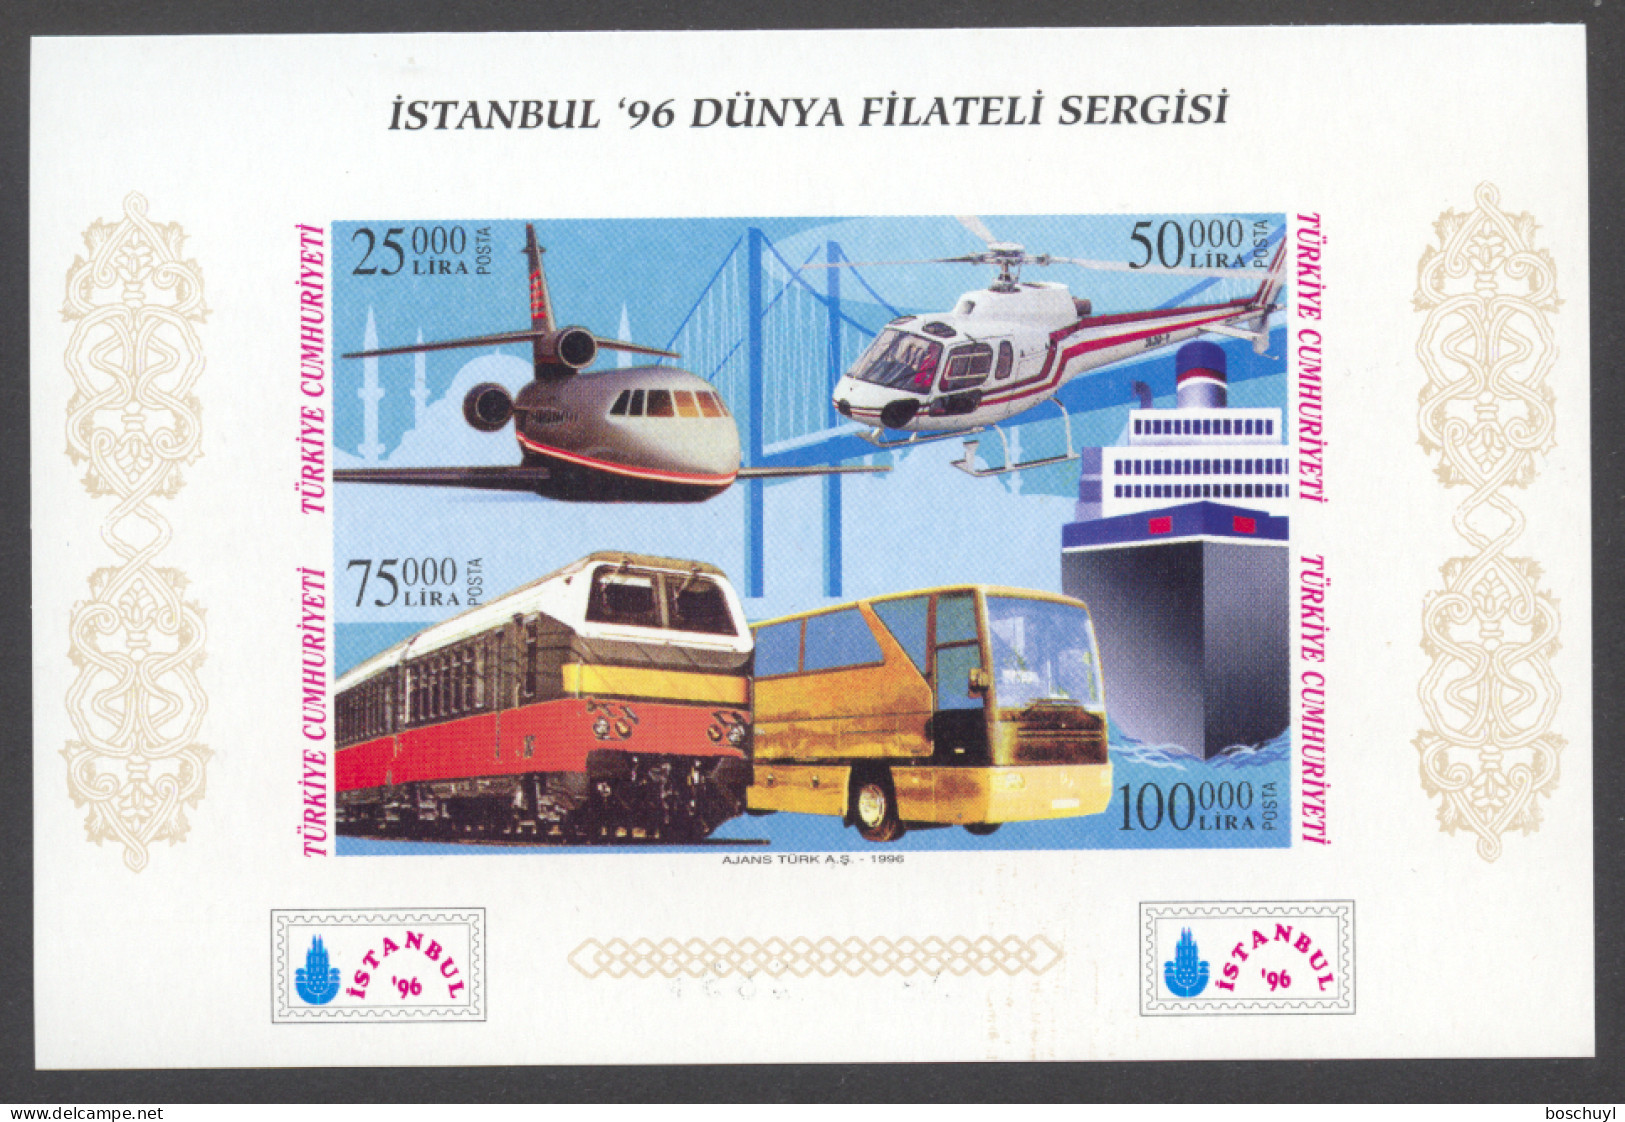 Turkey, 1996, Airplane, Helicopter, Train, Bus, Boat, Istanbul Exhibition, Black Imprint, MNH, Michel Block 32Bb - Nuovi